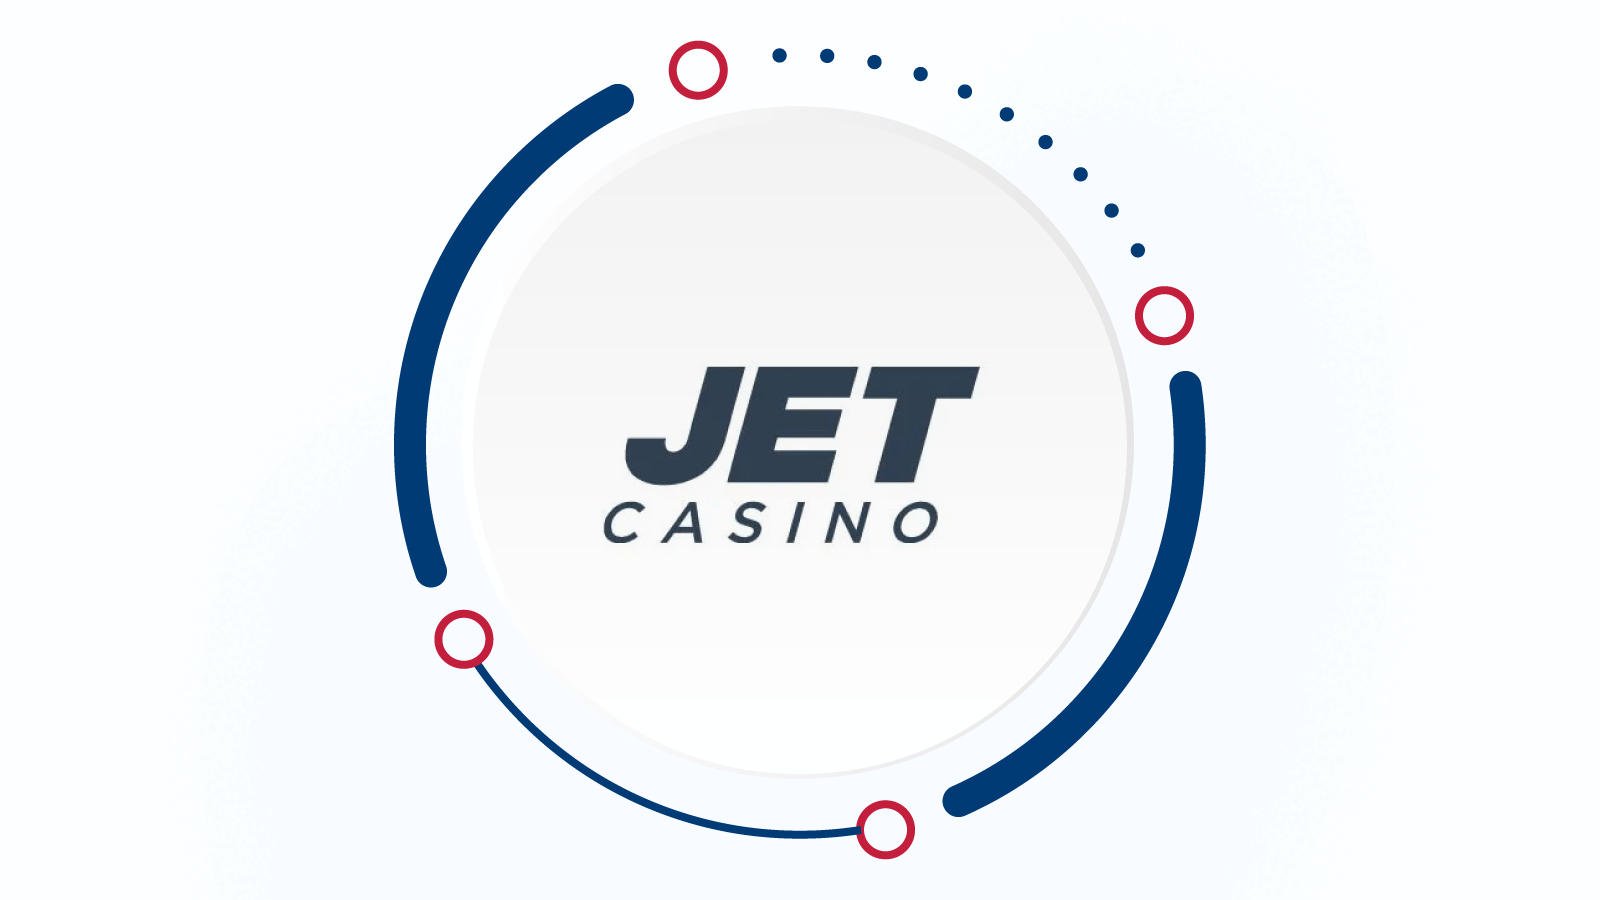 Jet Casino – Play the best new slot machines with 50 extra spins